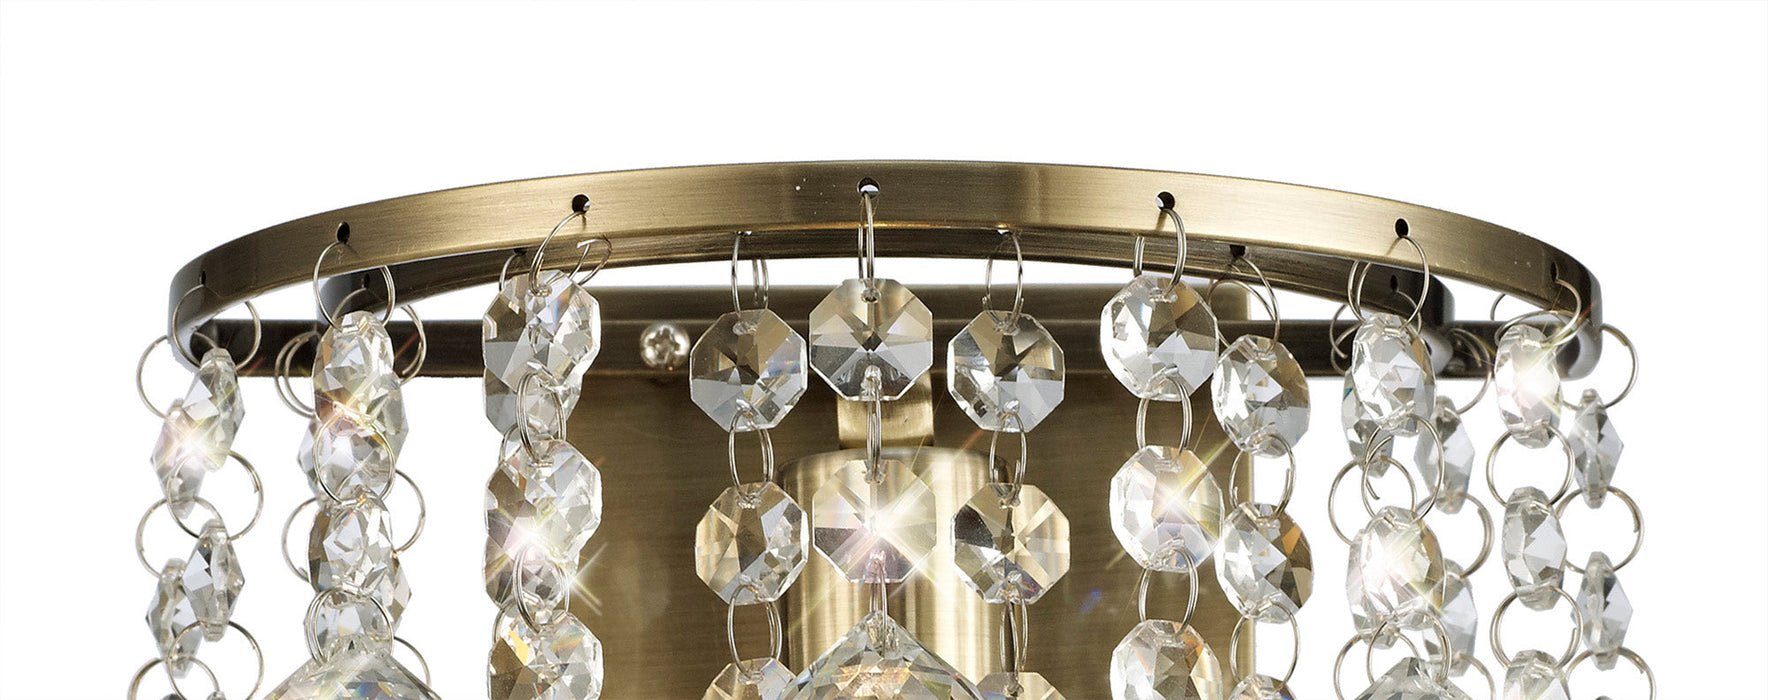 Deco Acton Wall Lamp 1 Light E14 Switched Antique Brass/Sphere Crystal • D0191